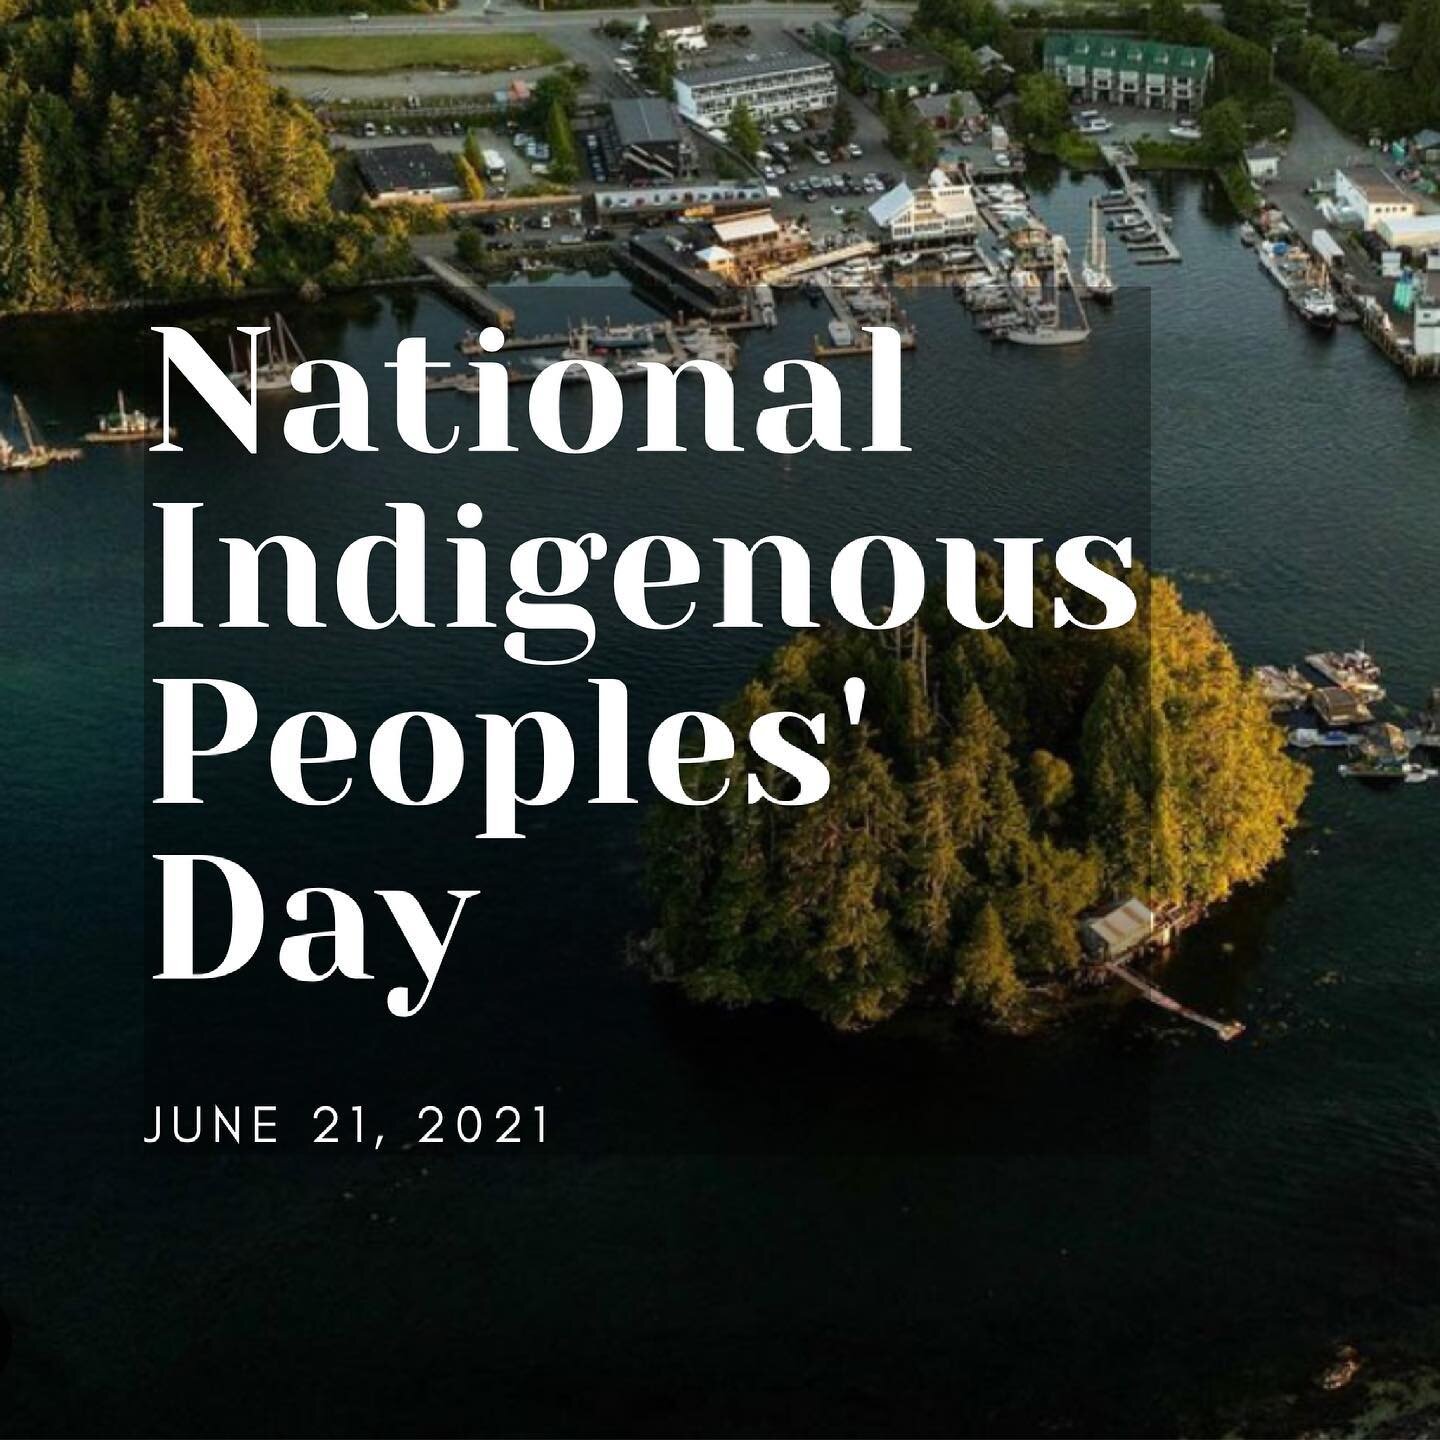 Today, on #NationalIndigenousPeoplesDay we  give special thanks to and acknowledge Hesquiaht First Nation, Tla-o-qui-aht First Nations, Toquaht Nation, Ahousaht First Nations, and Yuułuʔiłʔatḥ Nation on whose traditional territories we are grateful 